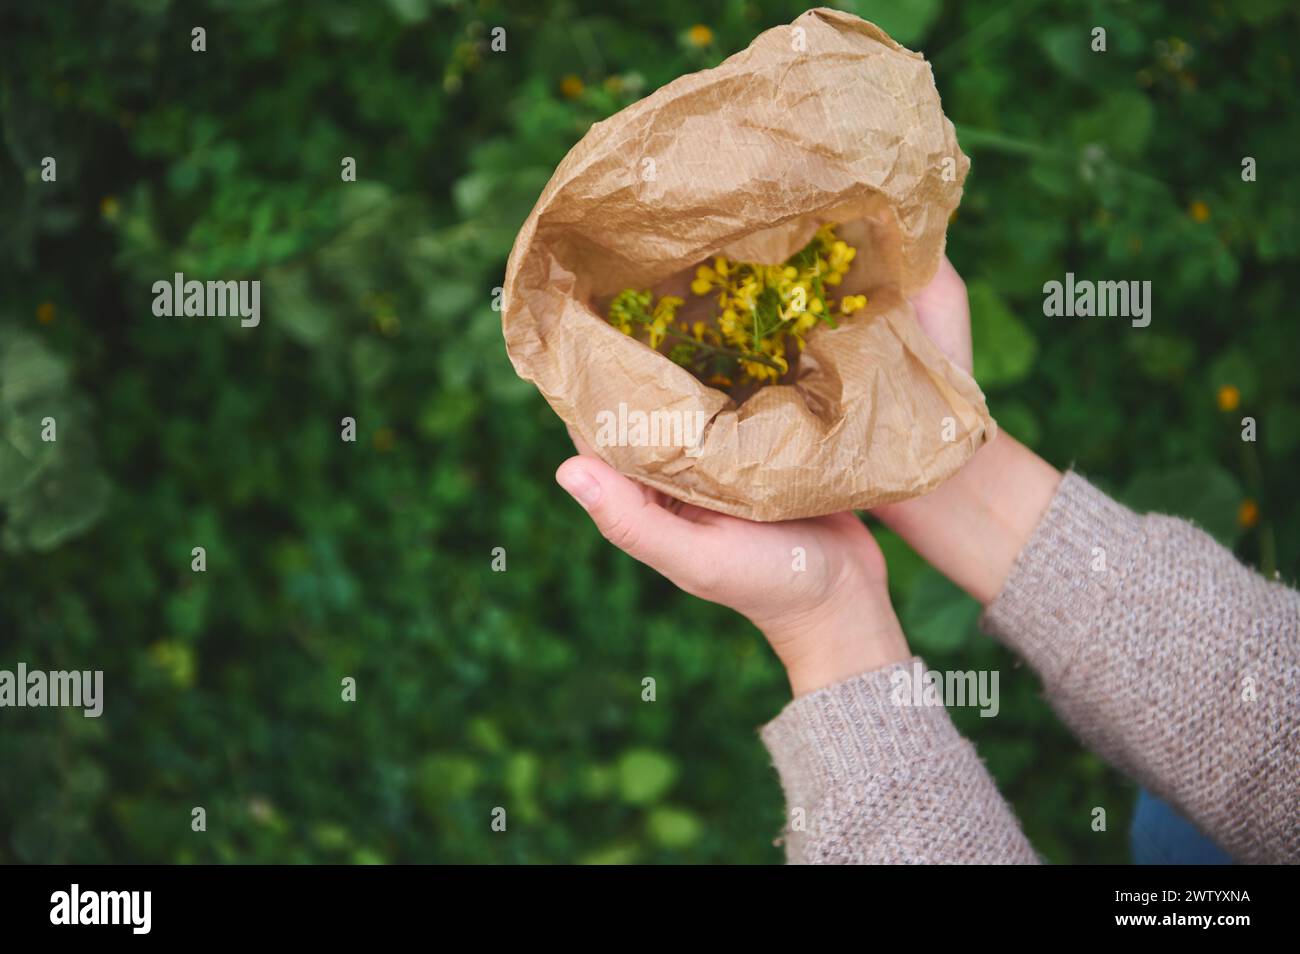 Naturopathy, aromatherapy, herbal alternative medicine. Top view hands of herbalist holding a recyclable paper bag with healing medicinal flowers whil Stock Photo